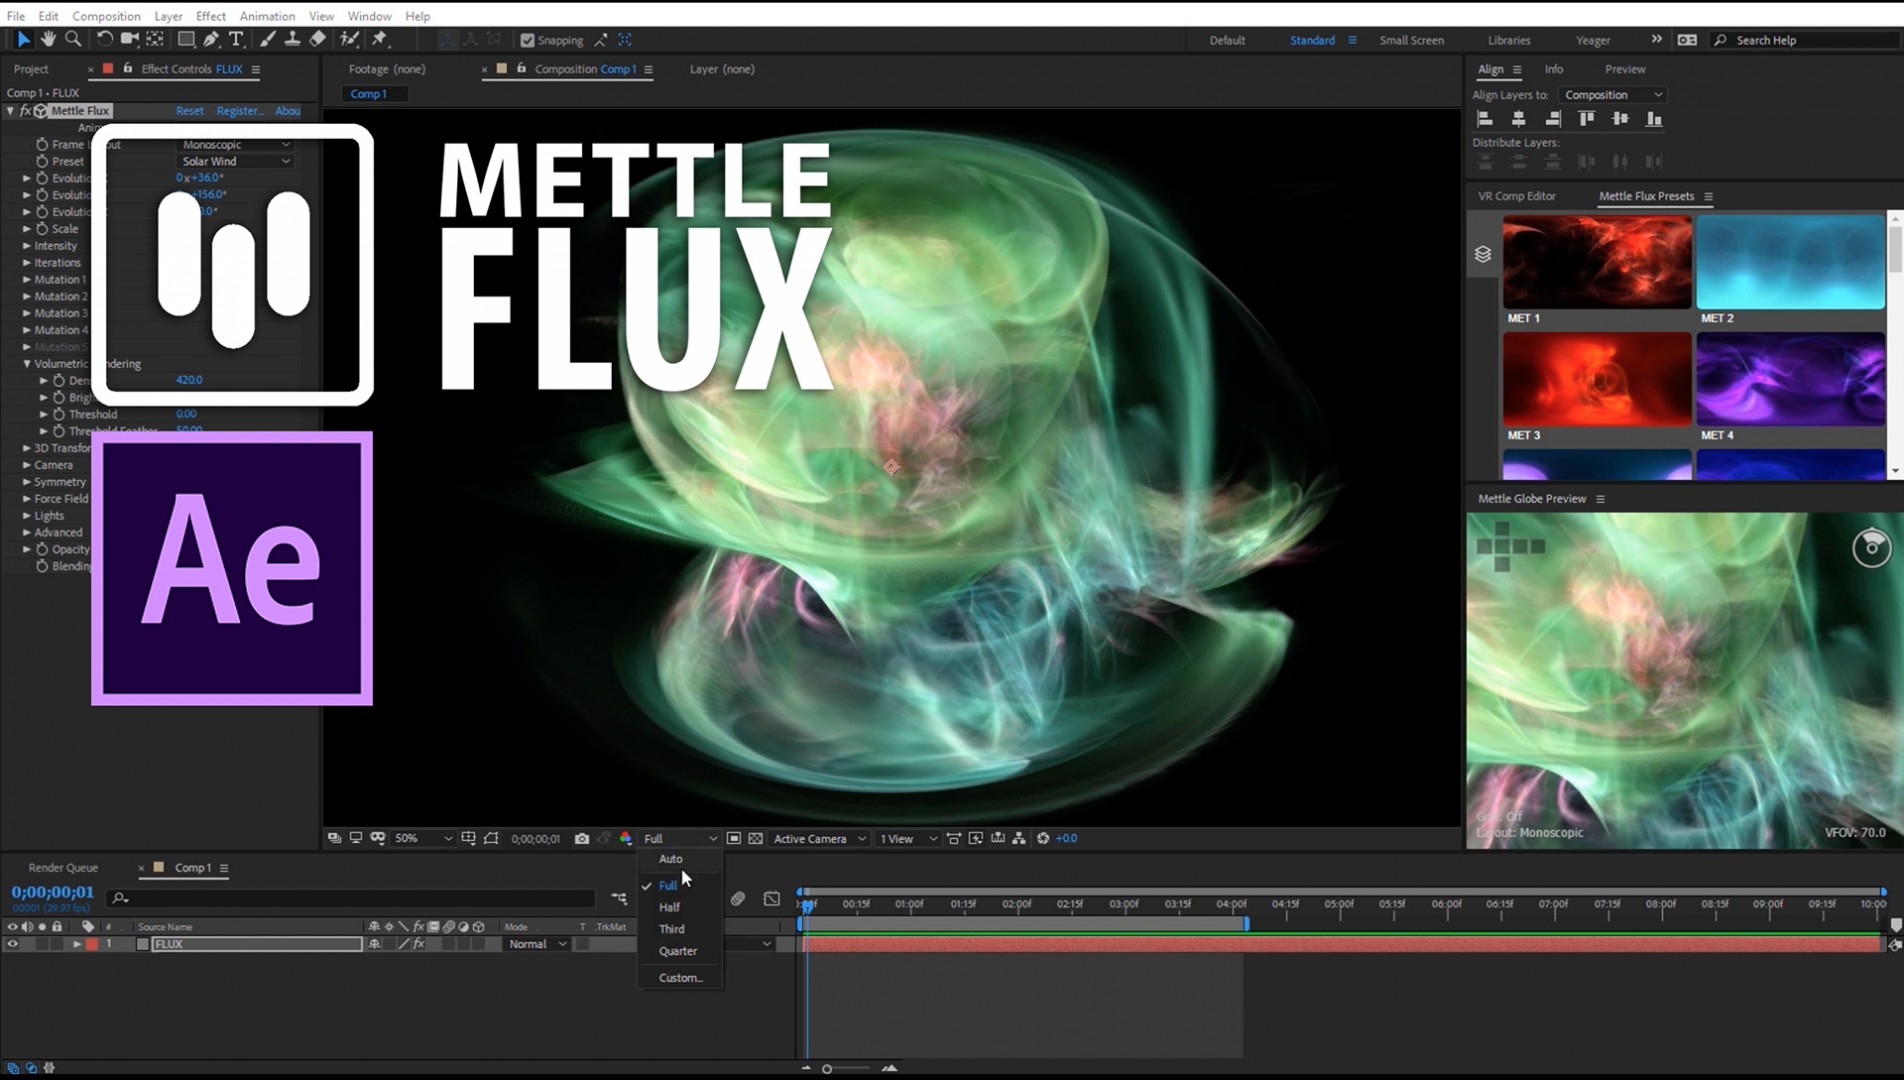 Mettle FLUX | Getting Started in After Effects